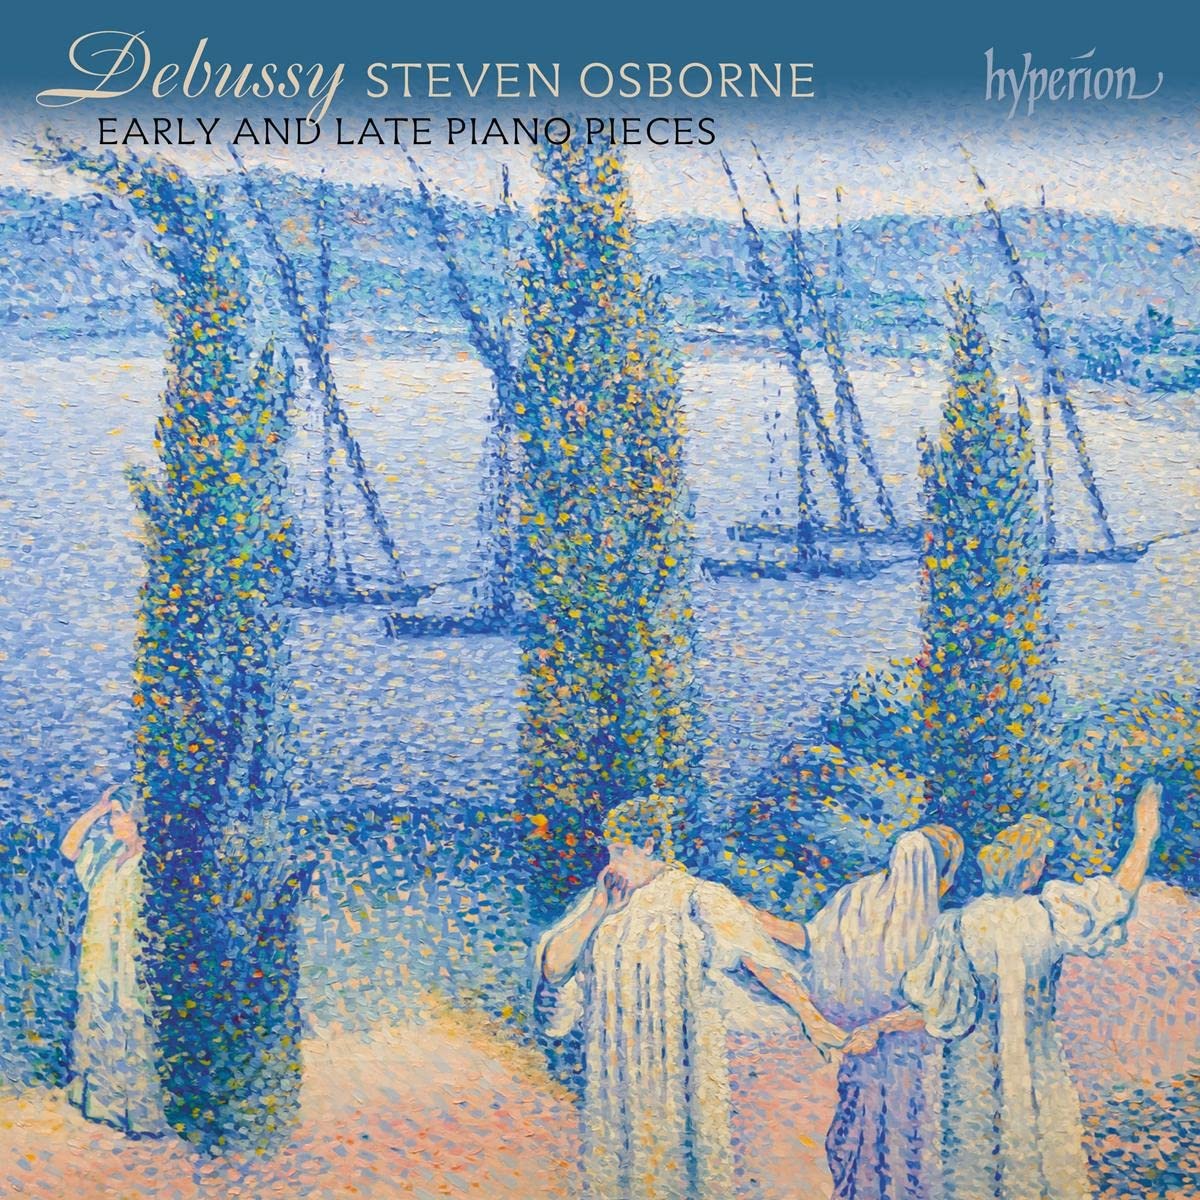 Steven Osborne - Debussy: Early and late piano pieces (2021) [FLAC 24bit/96kHz]